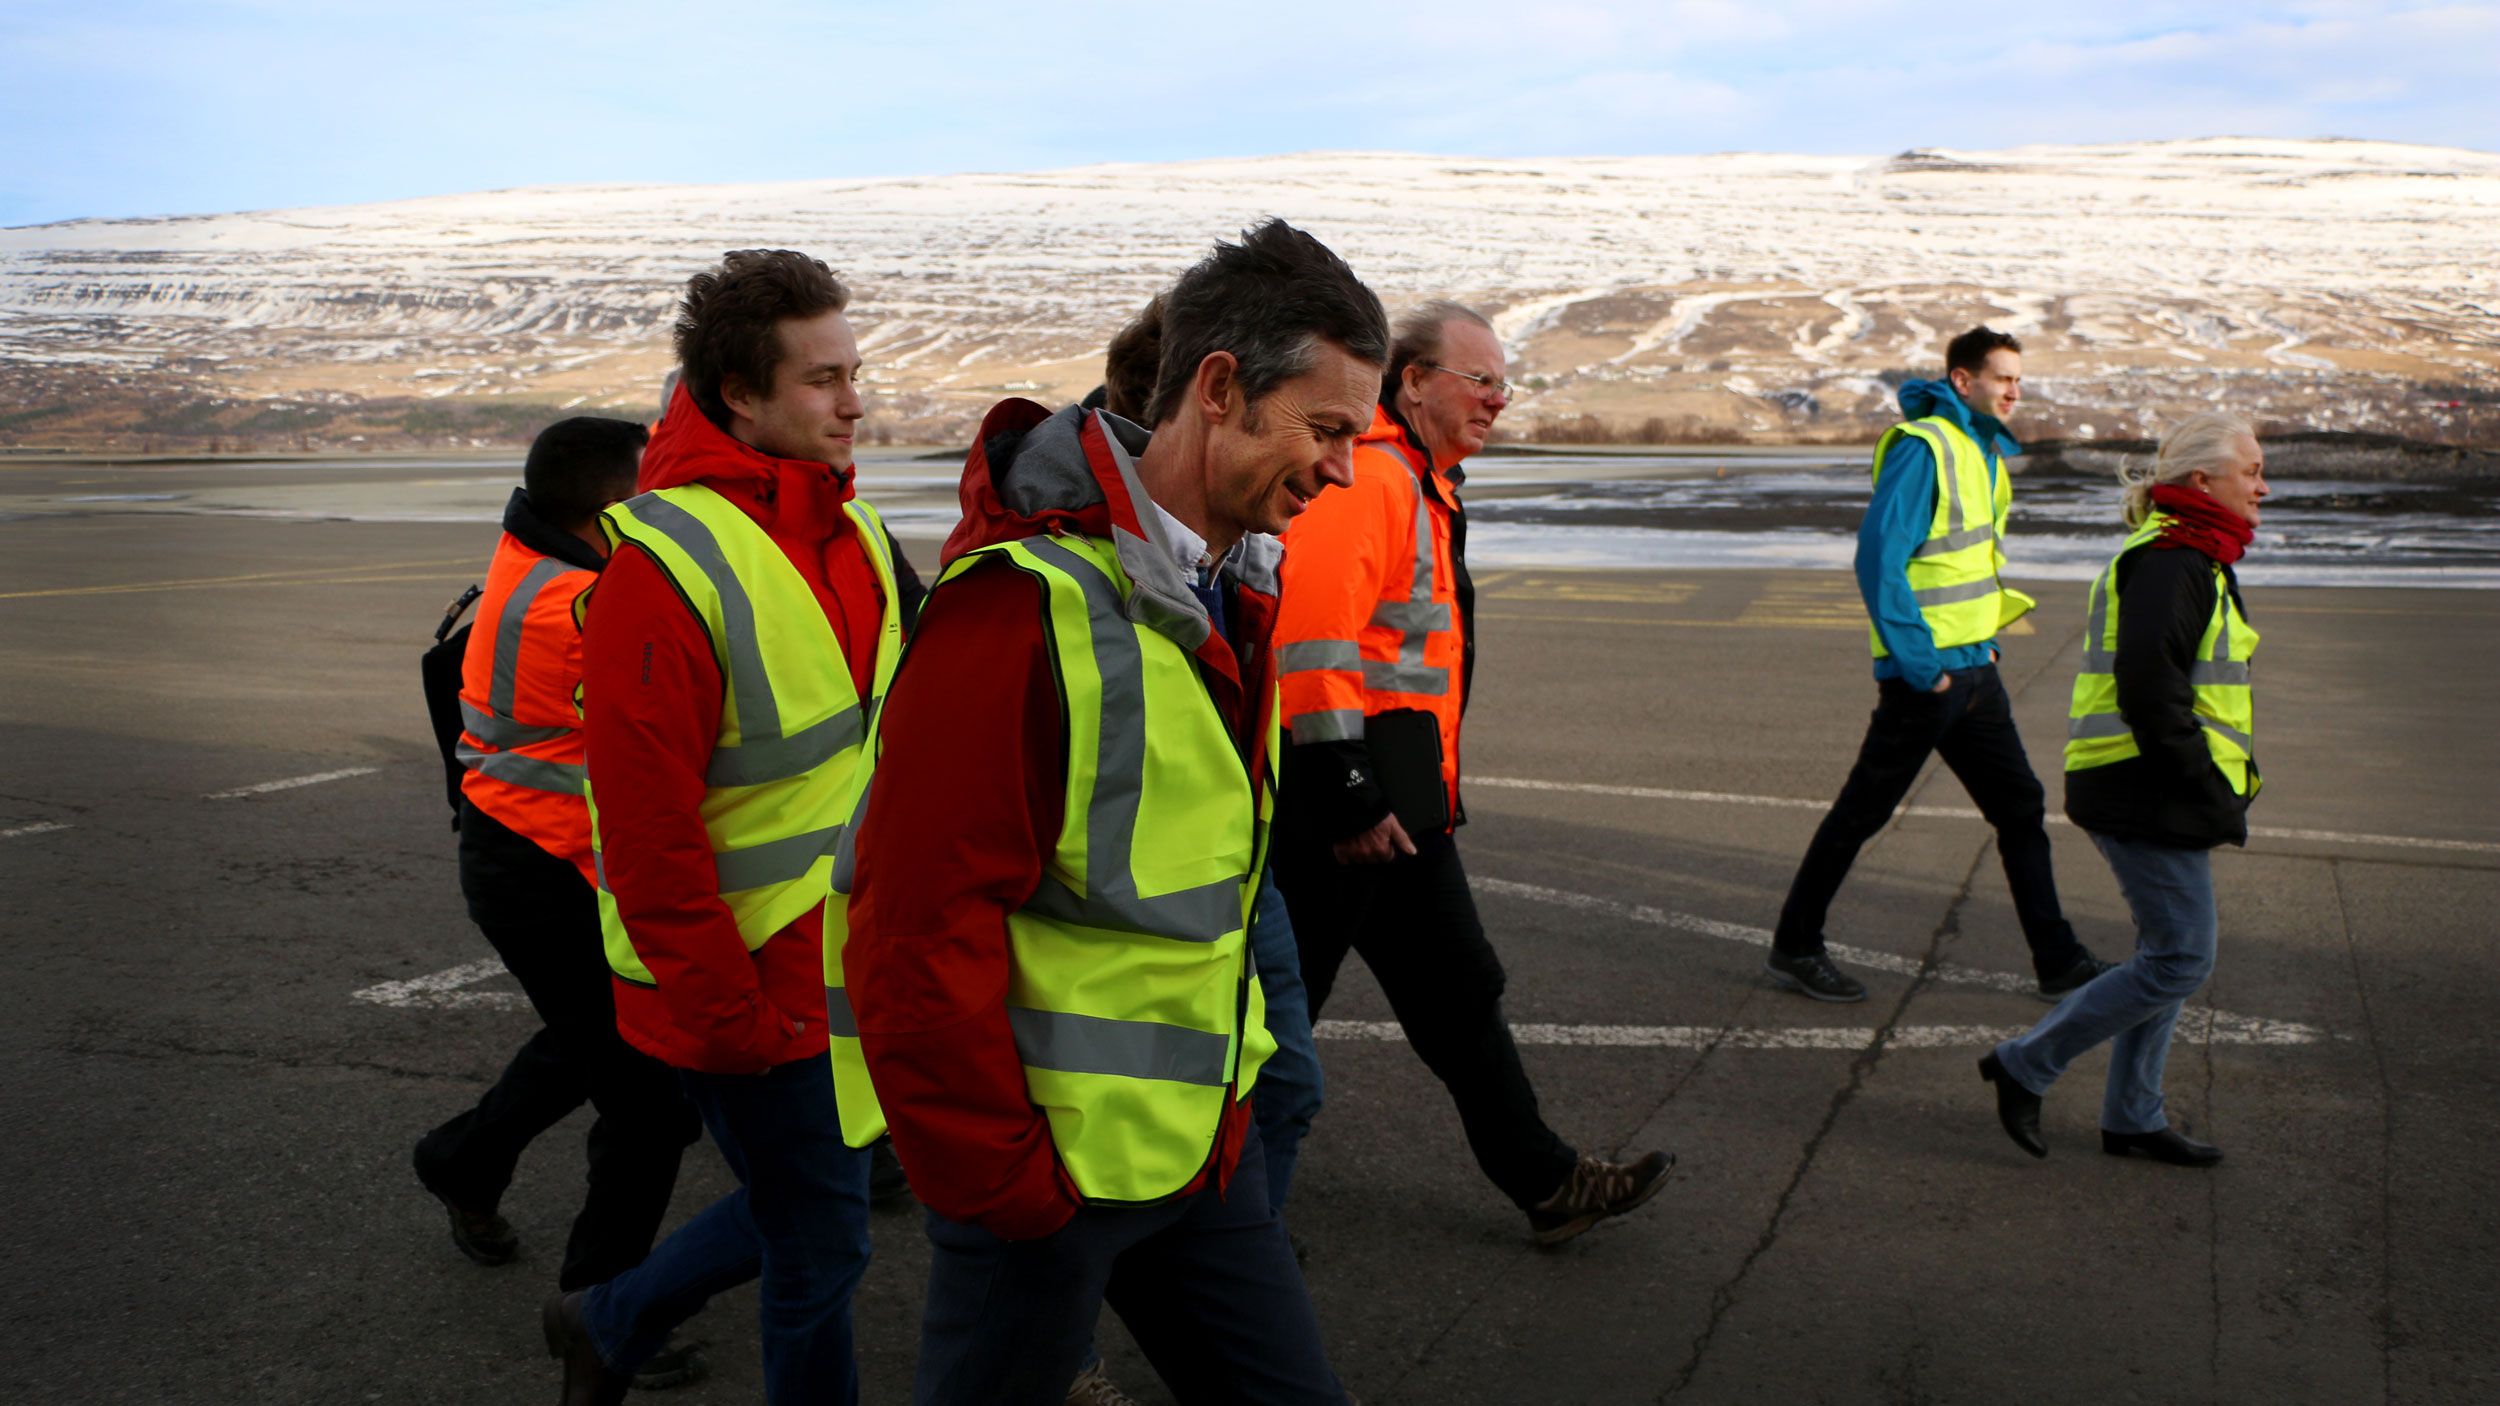 Ian Renfew, front center, and the atmospheric science team walk along the tarmac of the Akureyri airport. Image by Ari Daniel. Iceland, 2018.